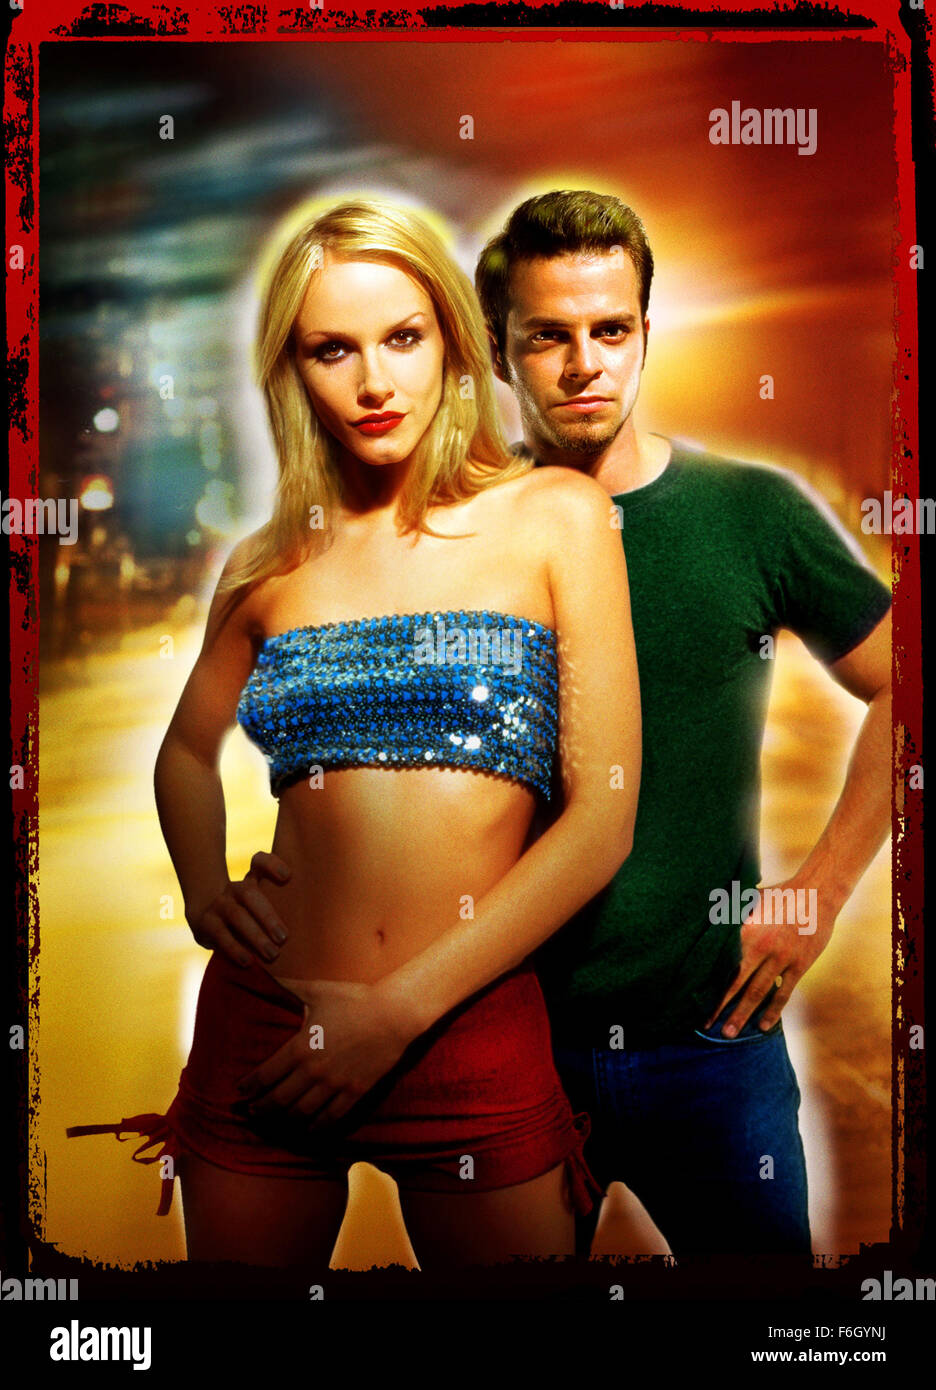 RELEASE DATE: October 5, 2001. MOVIE TITLE: The Learning Curve. STUDIO: Motion Picture Corporation of America (MPCA). PLOT: . PICTURED: CARMINE GIOVINAZZO as Paul Cleveland and MONET MAZUR as Georgia. Stock Photo